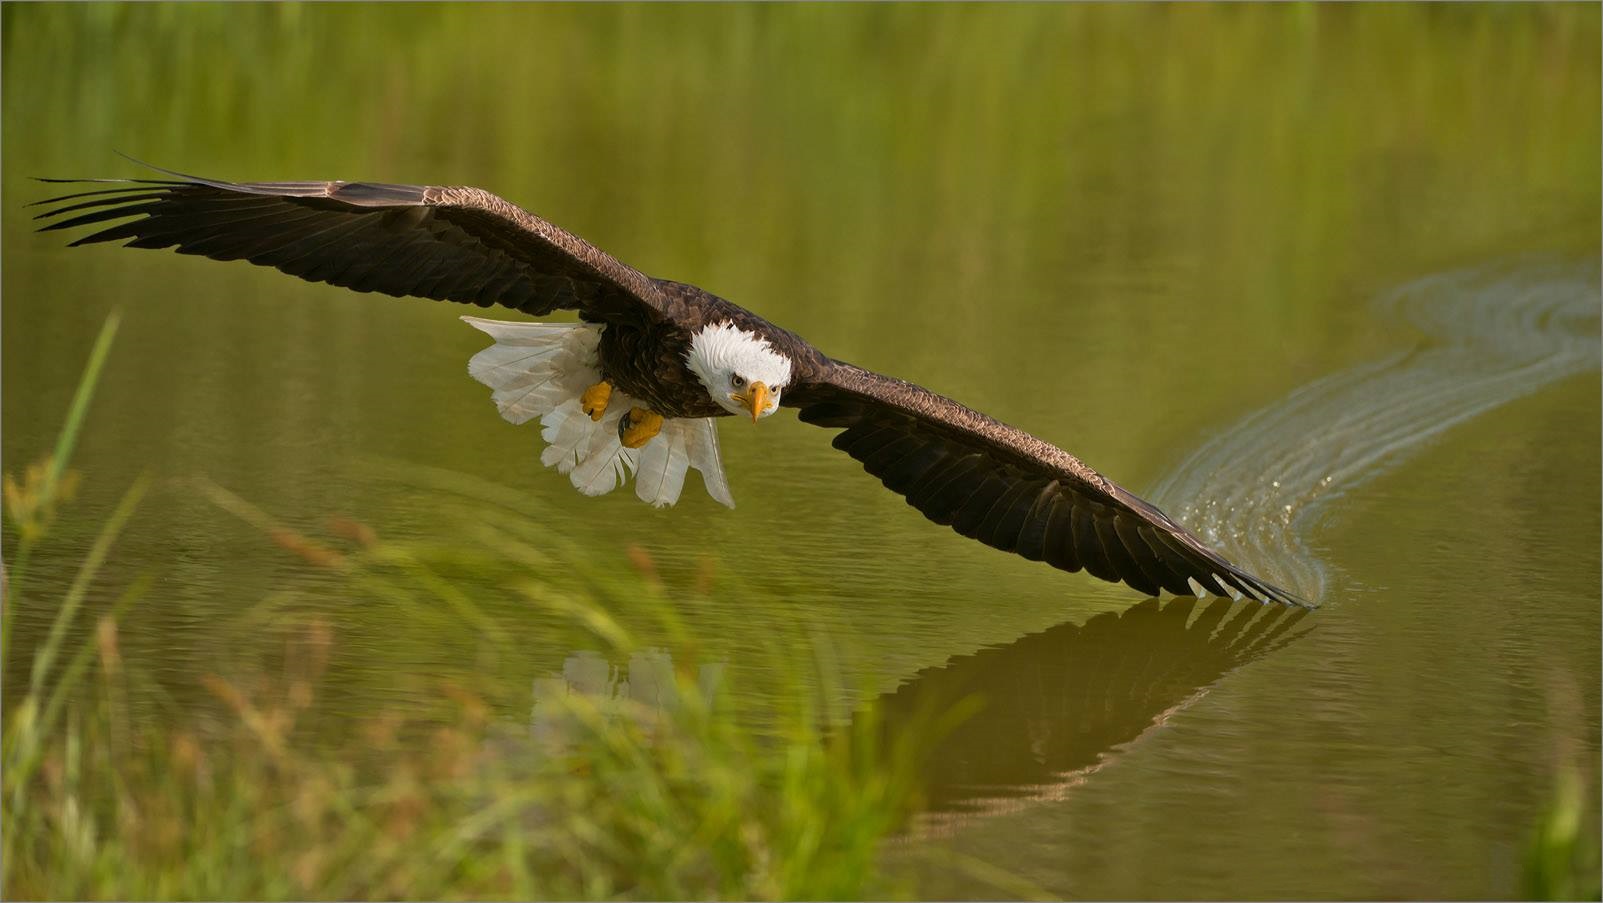 Bald eagle glides over water while hunting